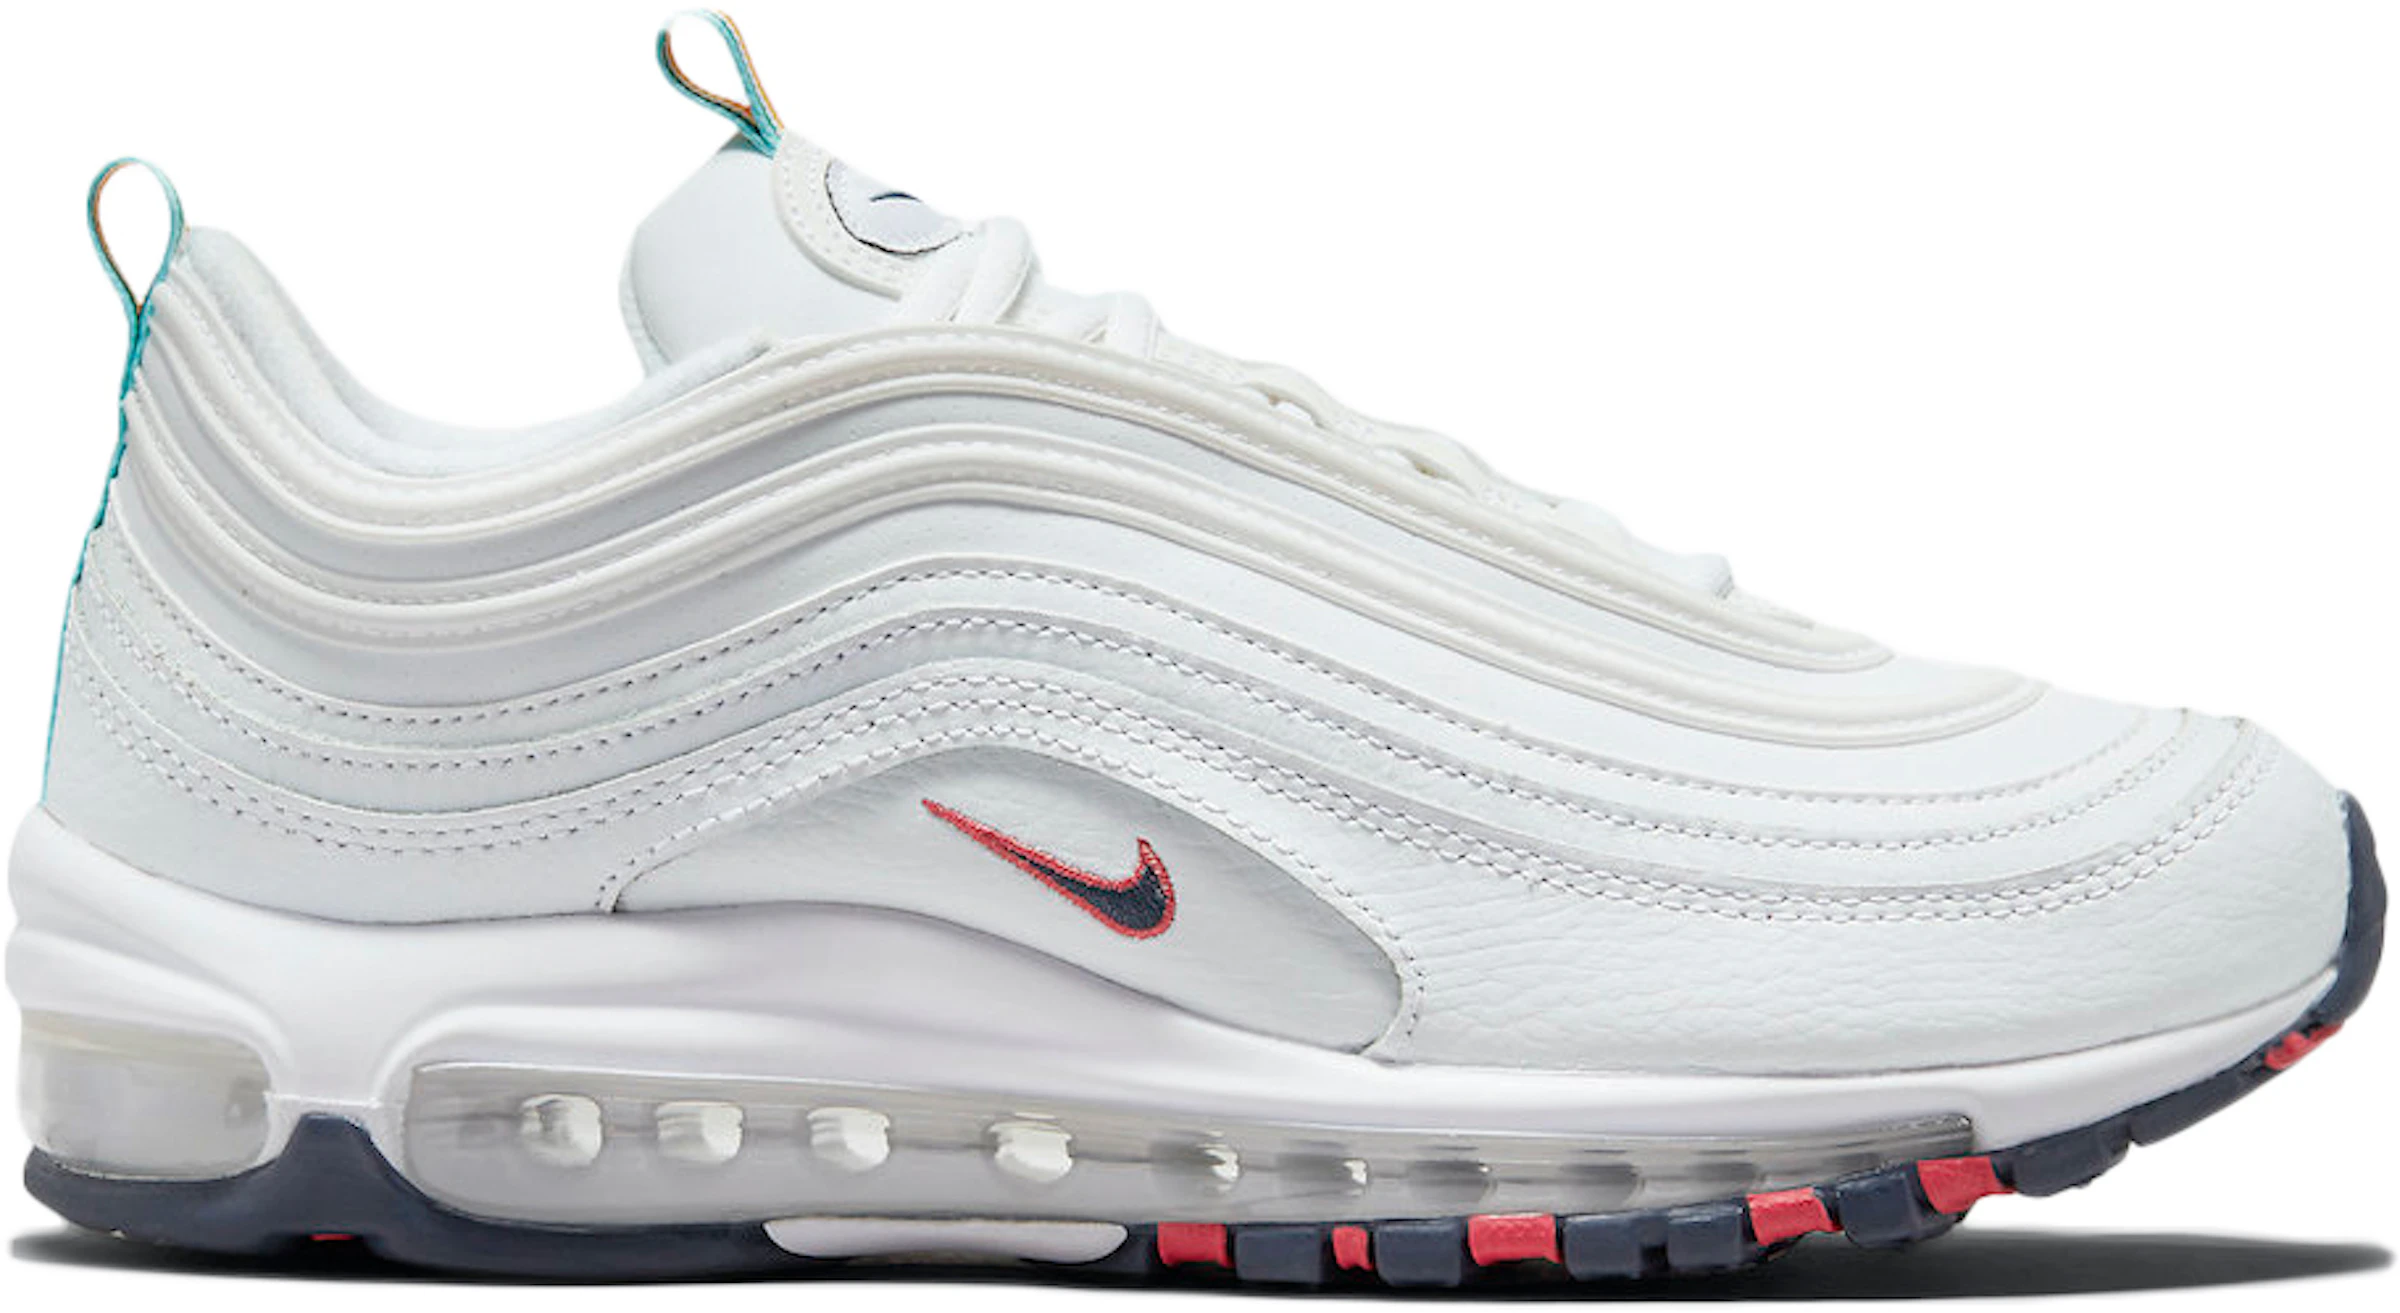 Nike Air Max 97 White Multi Color Pull Tabs (Women's) - DH1592-100 - US